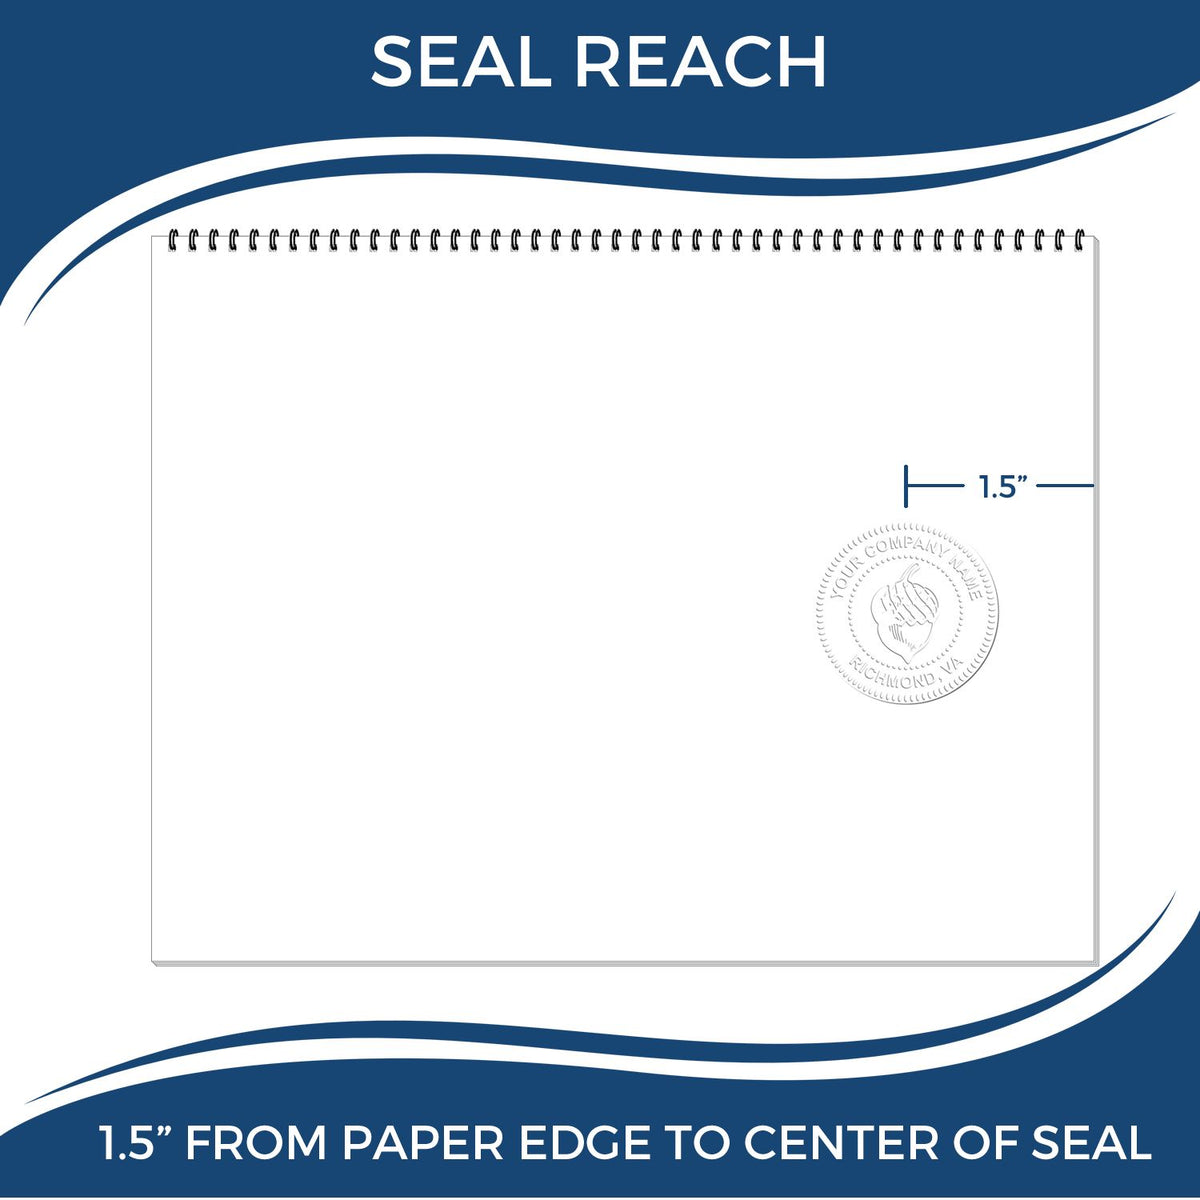 An infographic showing the seal reach which is represented by a ruler and a miniature seal image of the Hybrid Connecticut Architect Seal